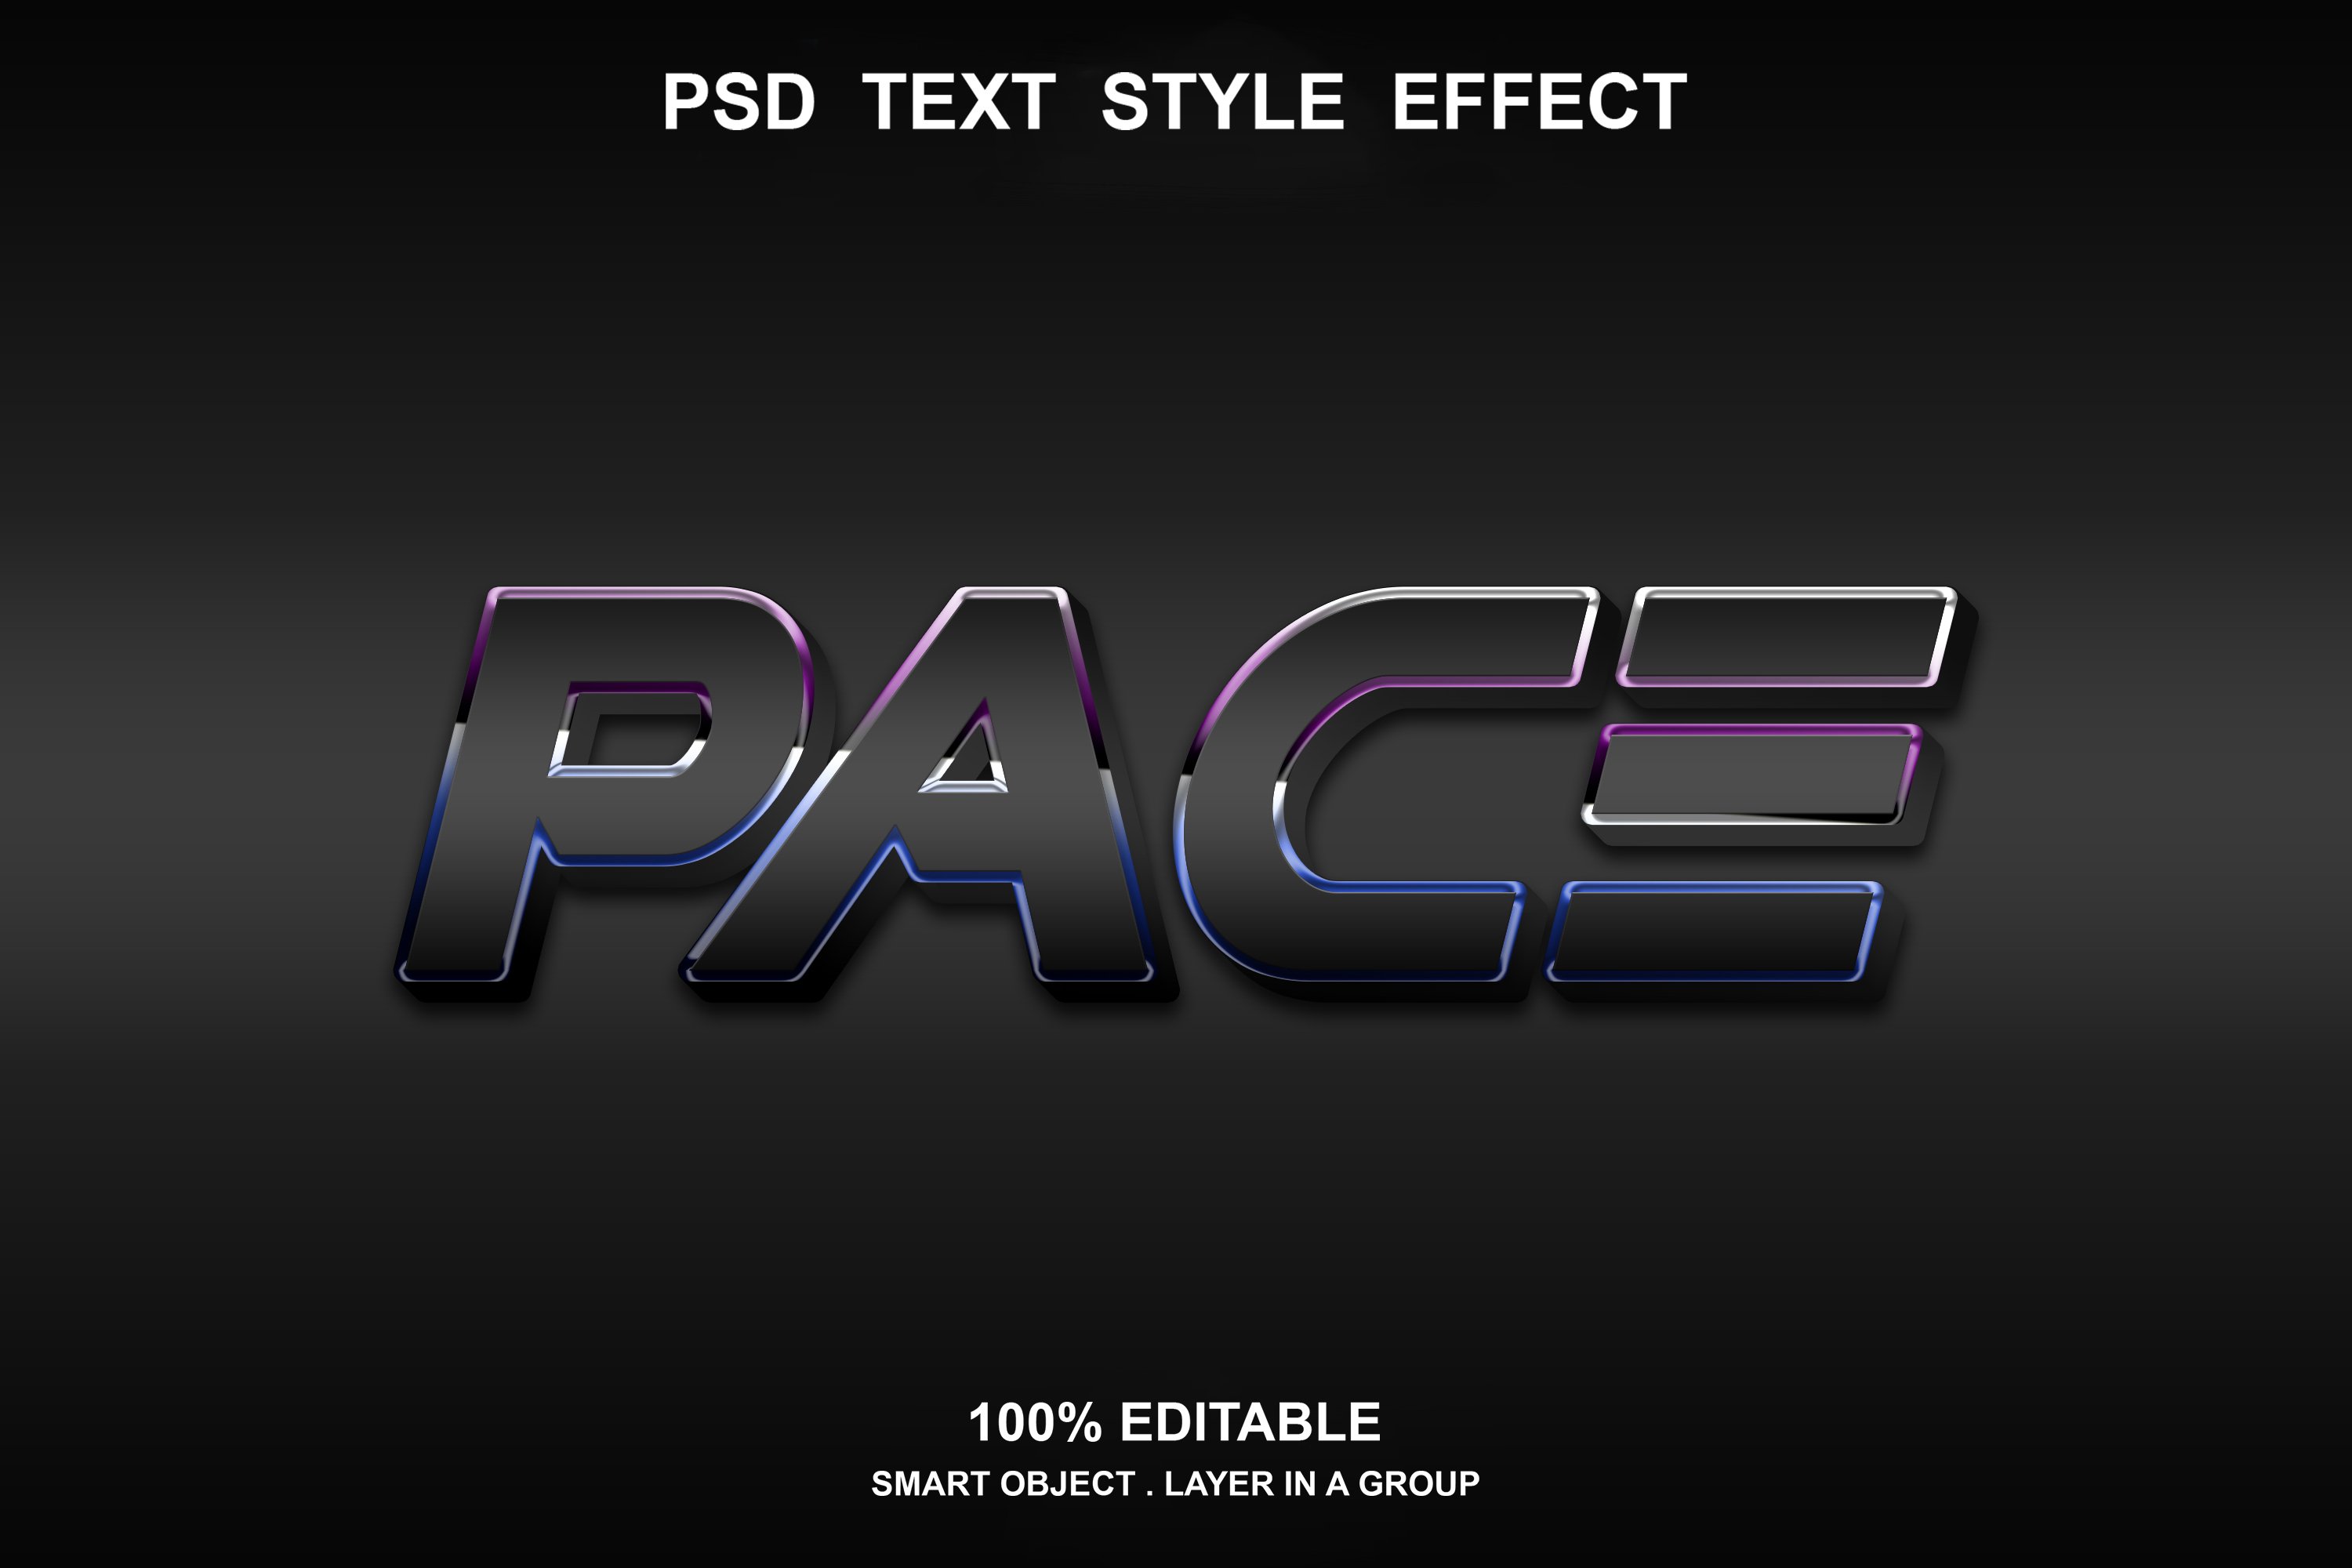 PSD 9 Top Text Effect Editablecover image.